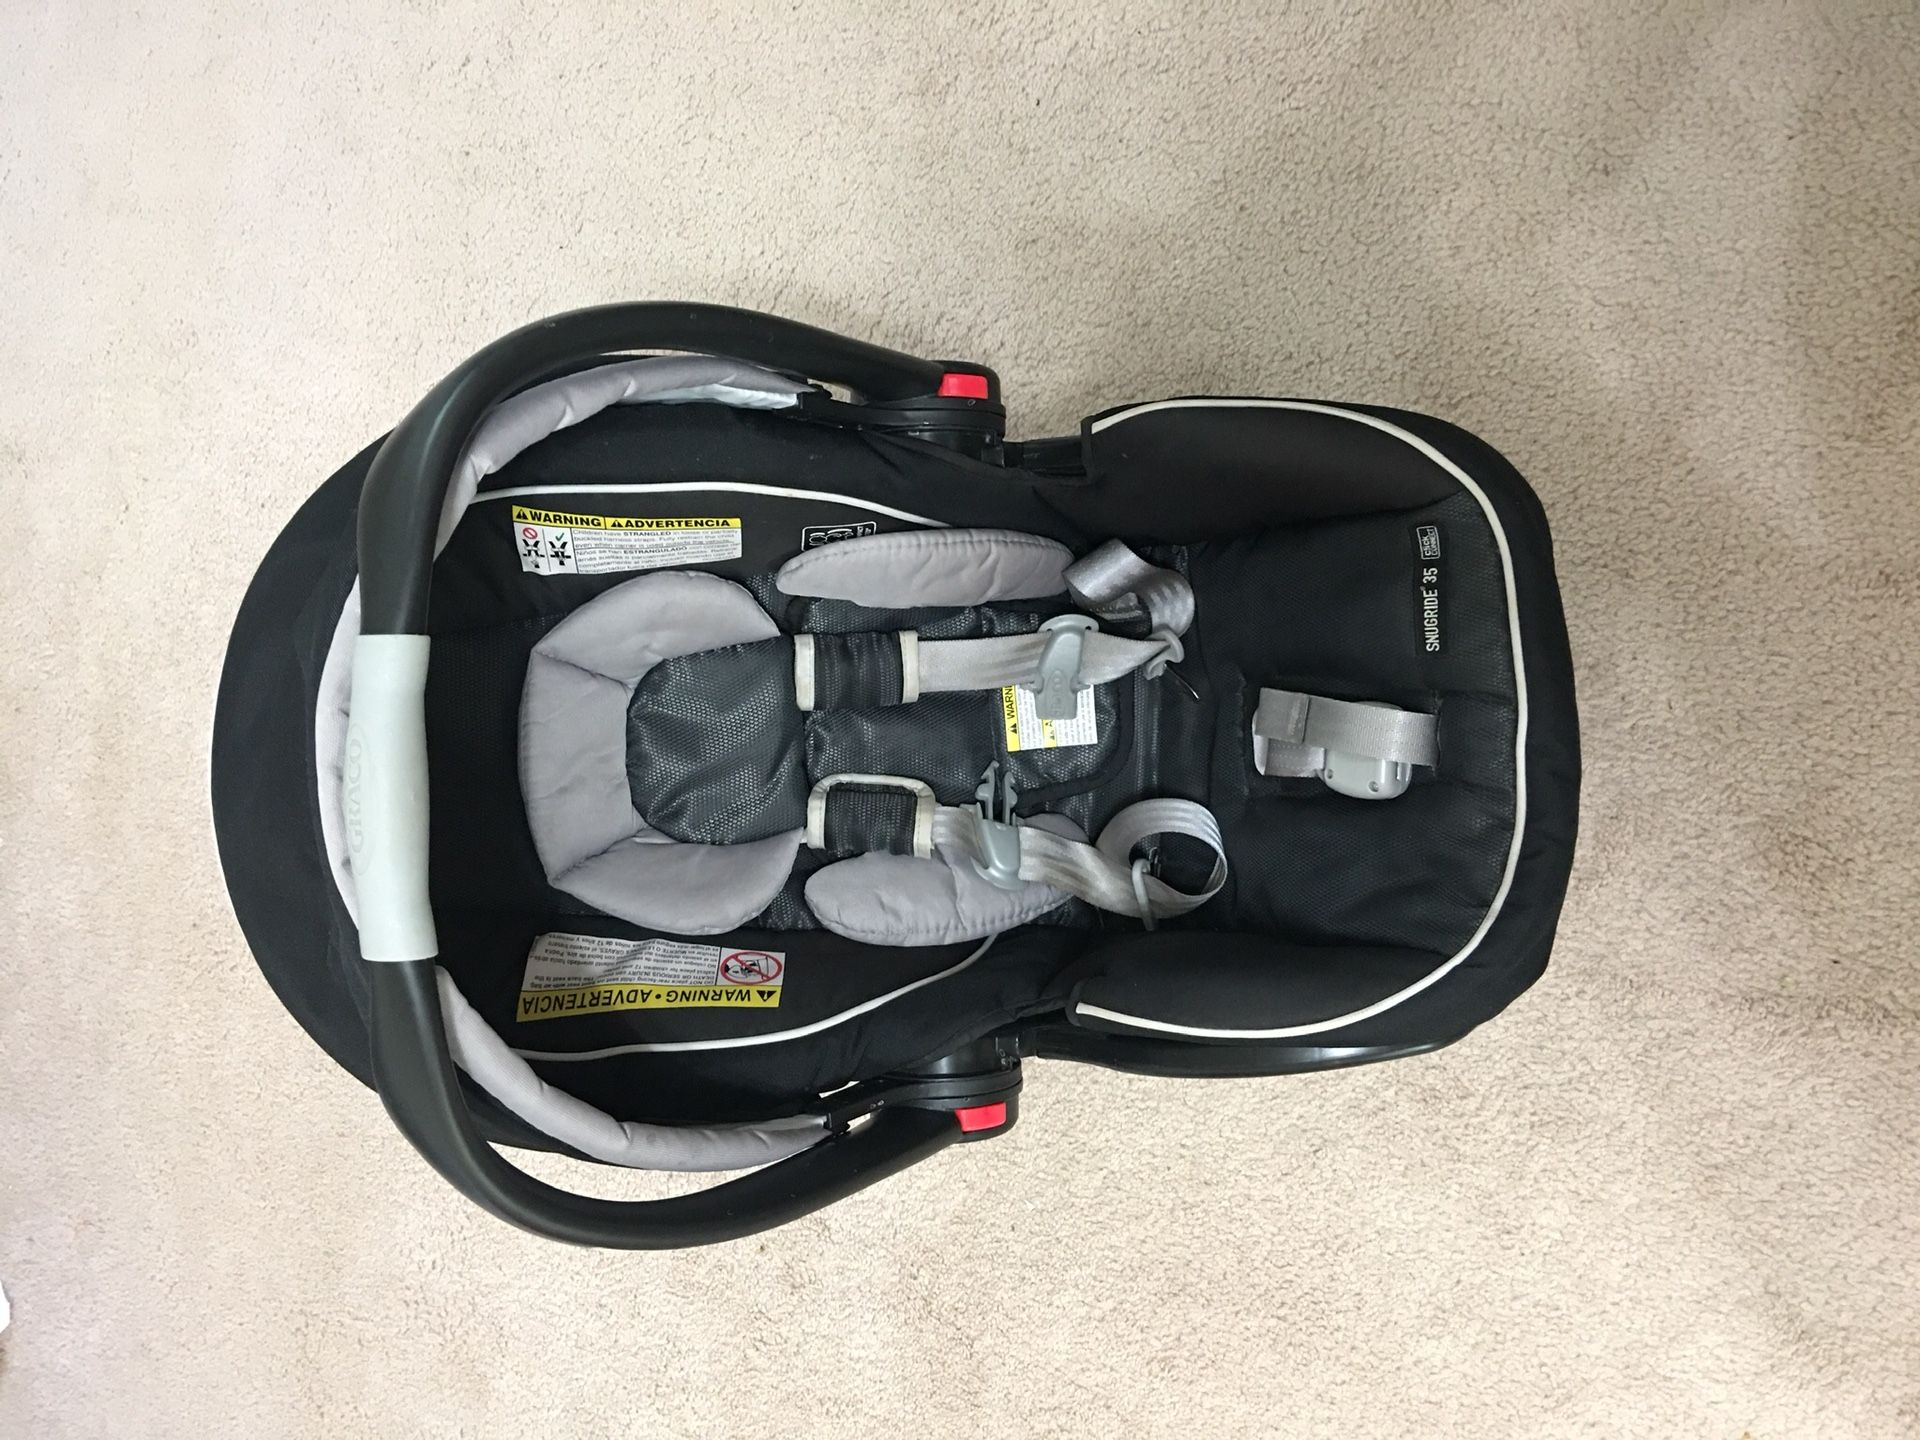 Graco Snugride click connect 35 car seat with base